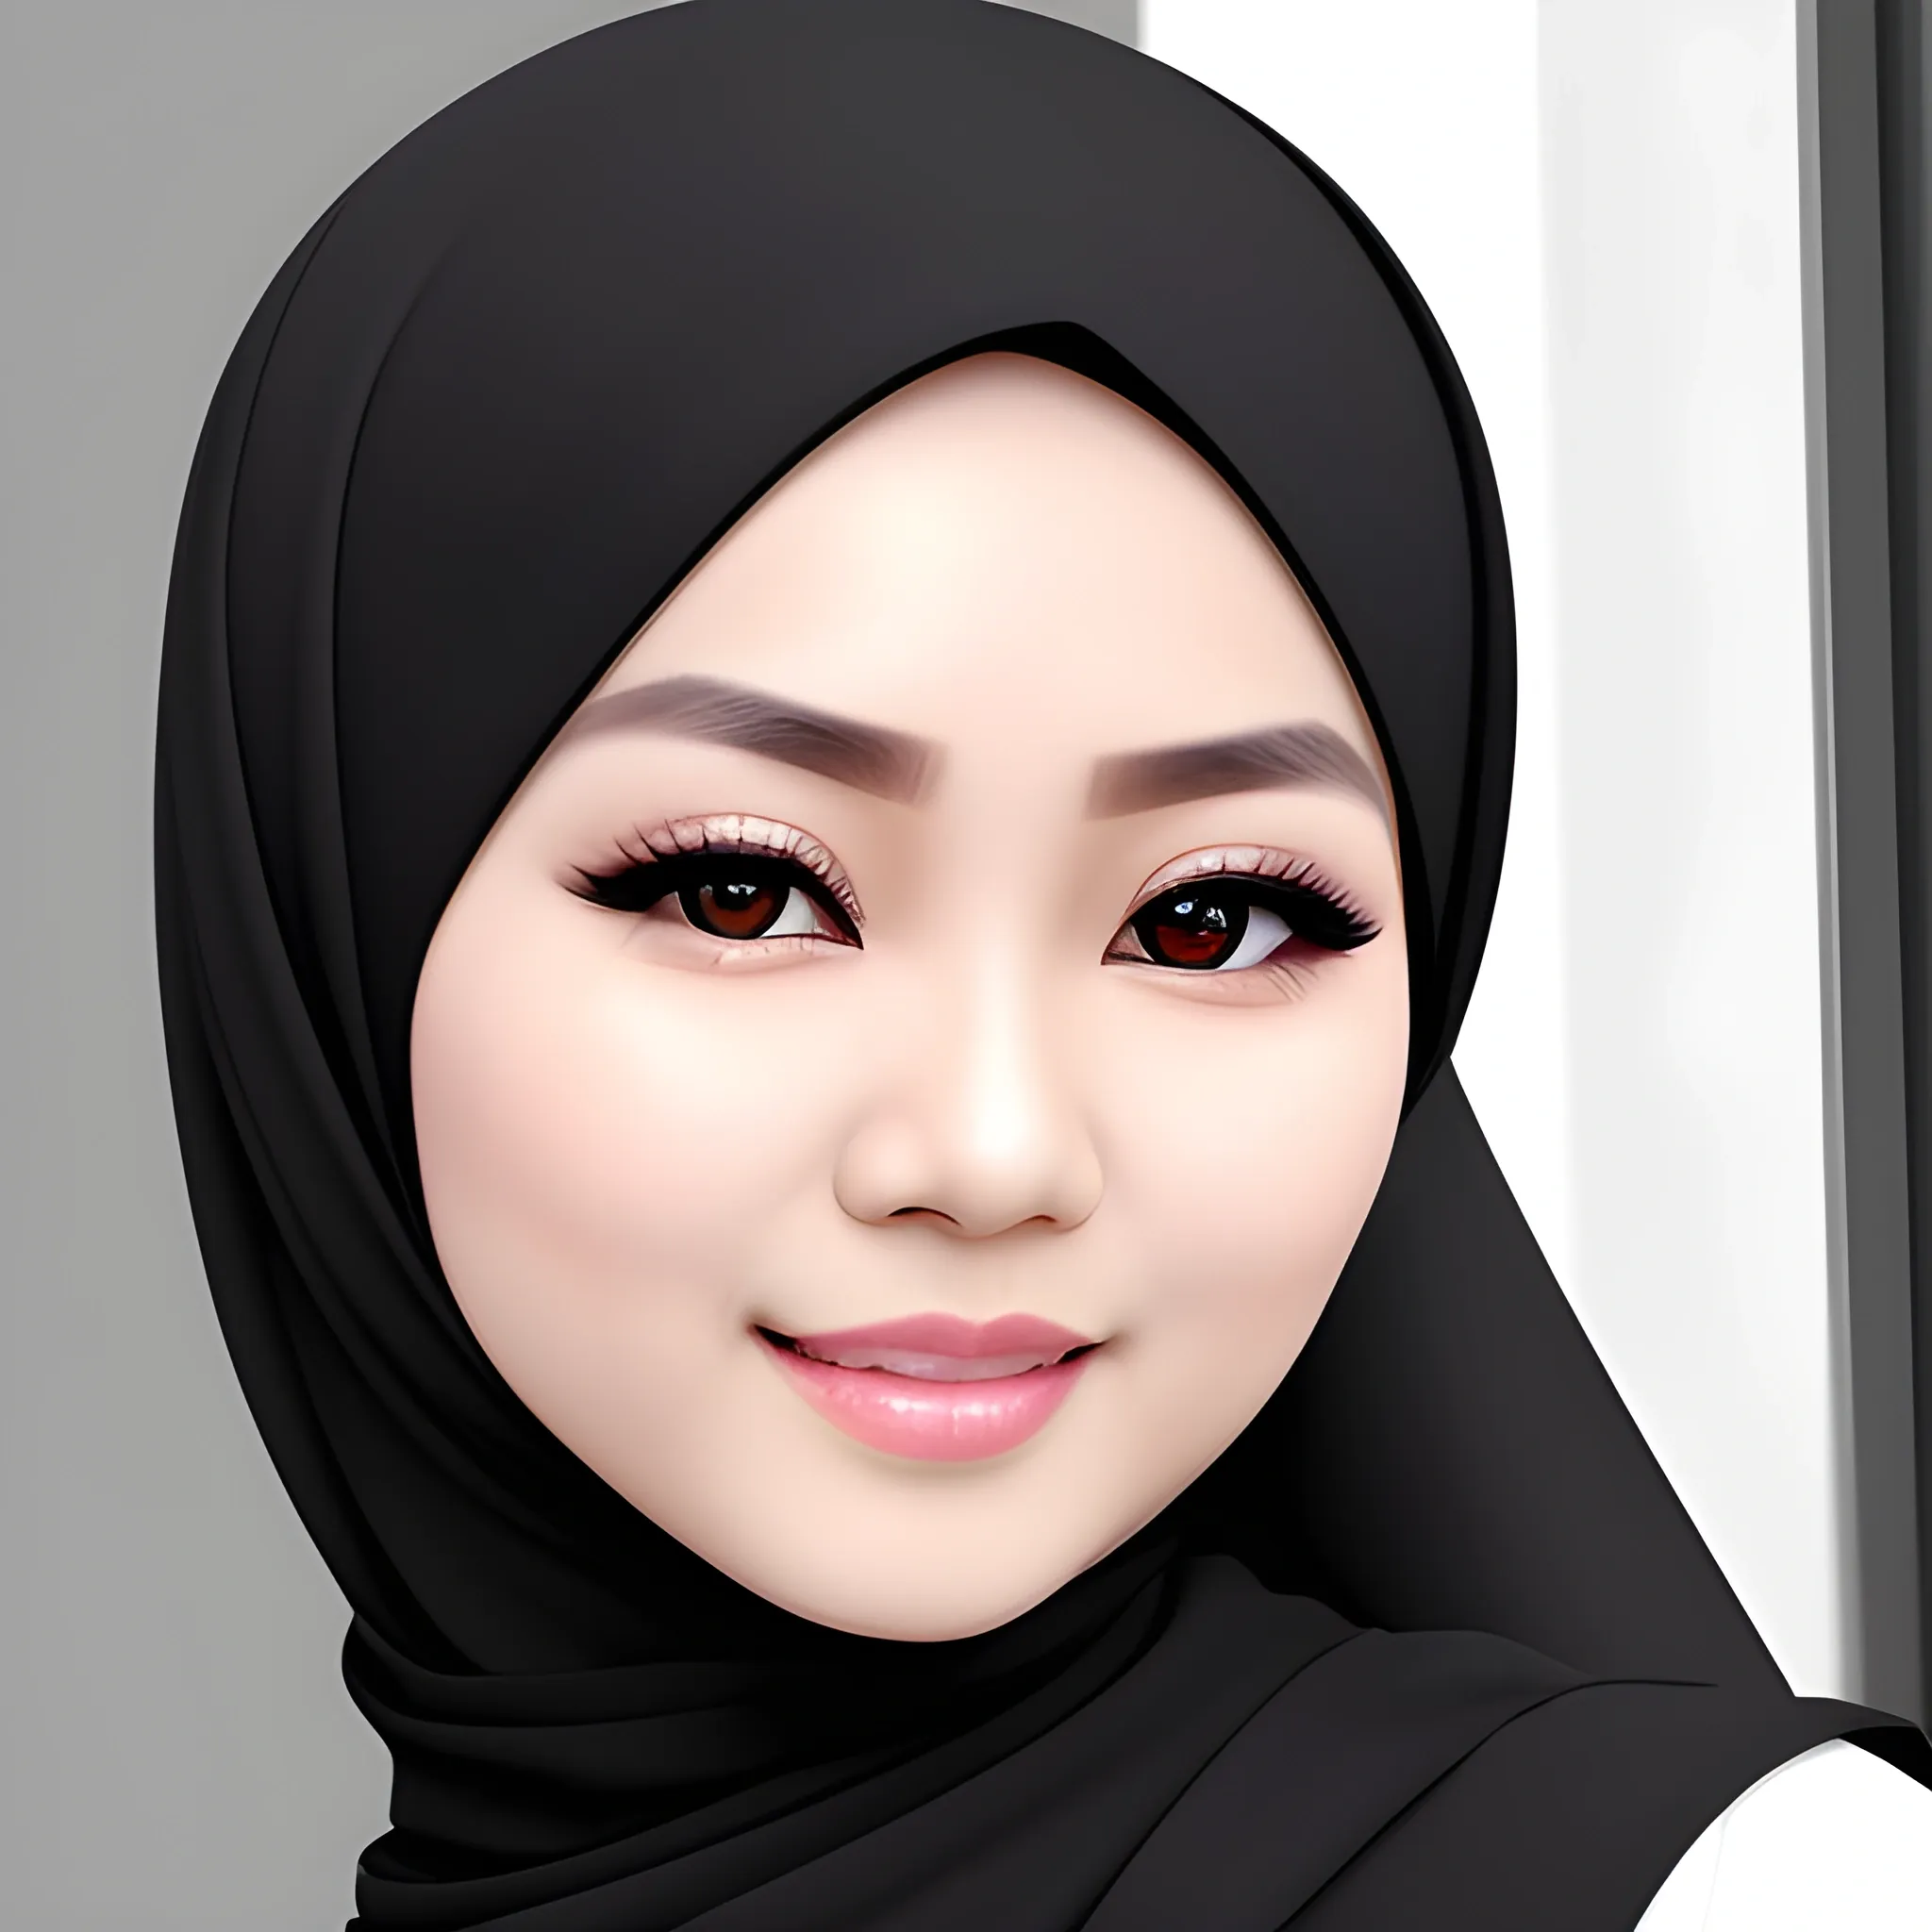 pretty women indonesian, elegant, happy, face detail, sharp nose, black eyes, wearing black hijab, white blouse casual, in the darkness, her eyes looking at camera, 4k